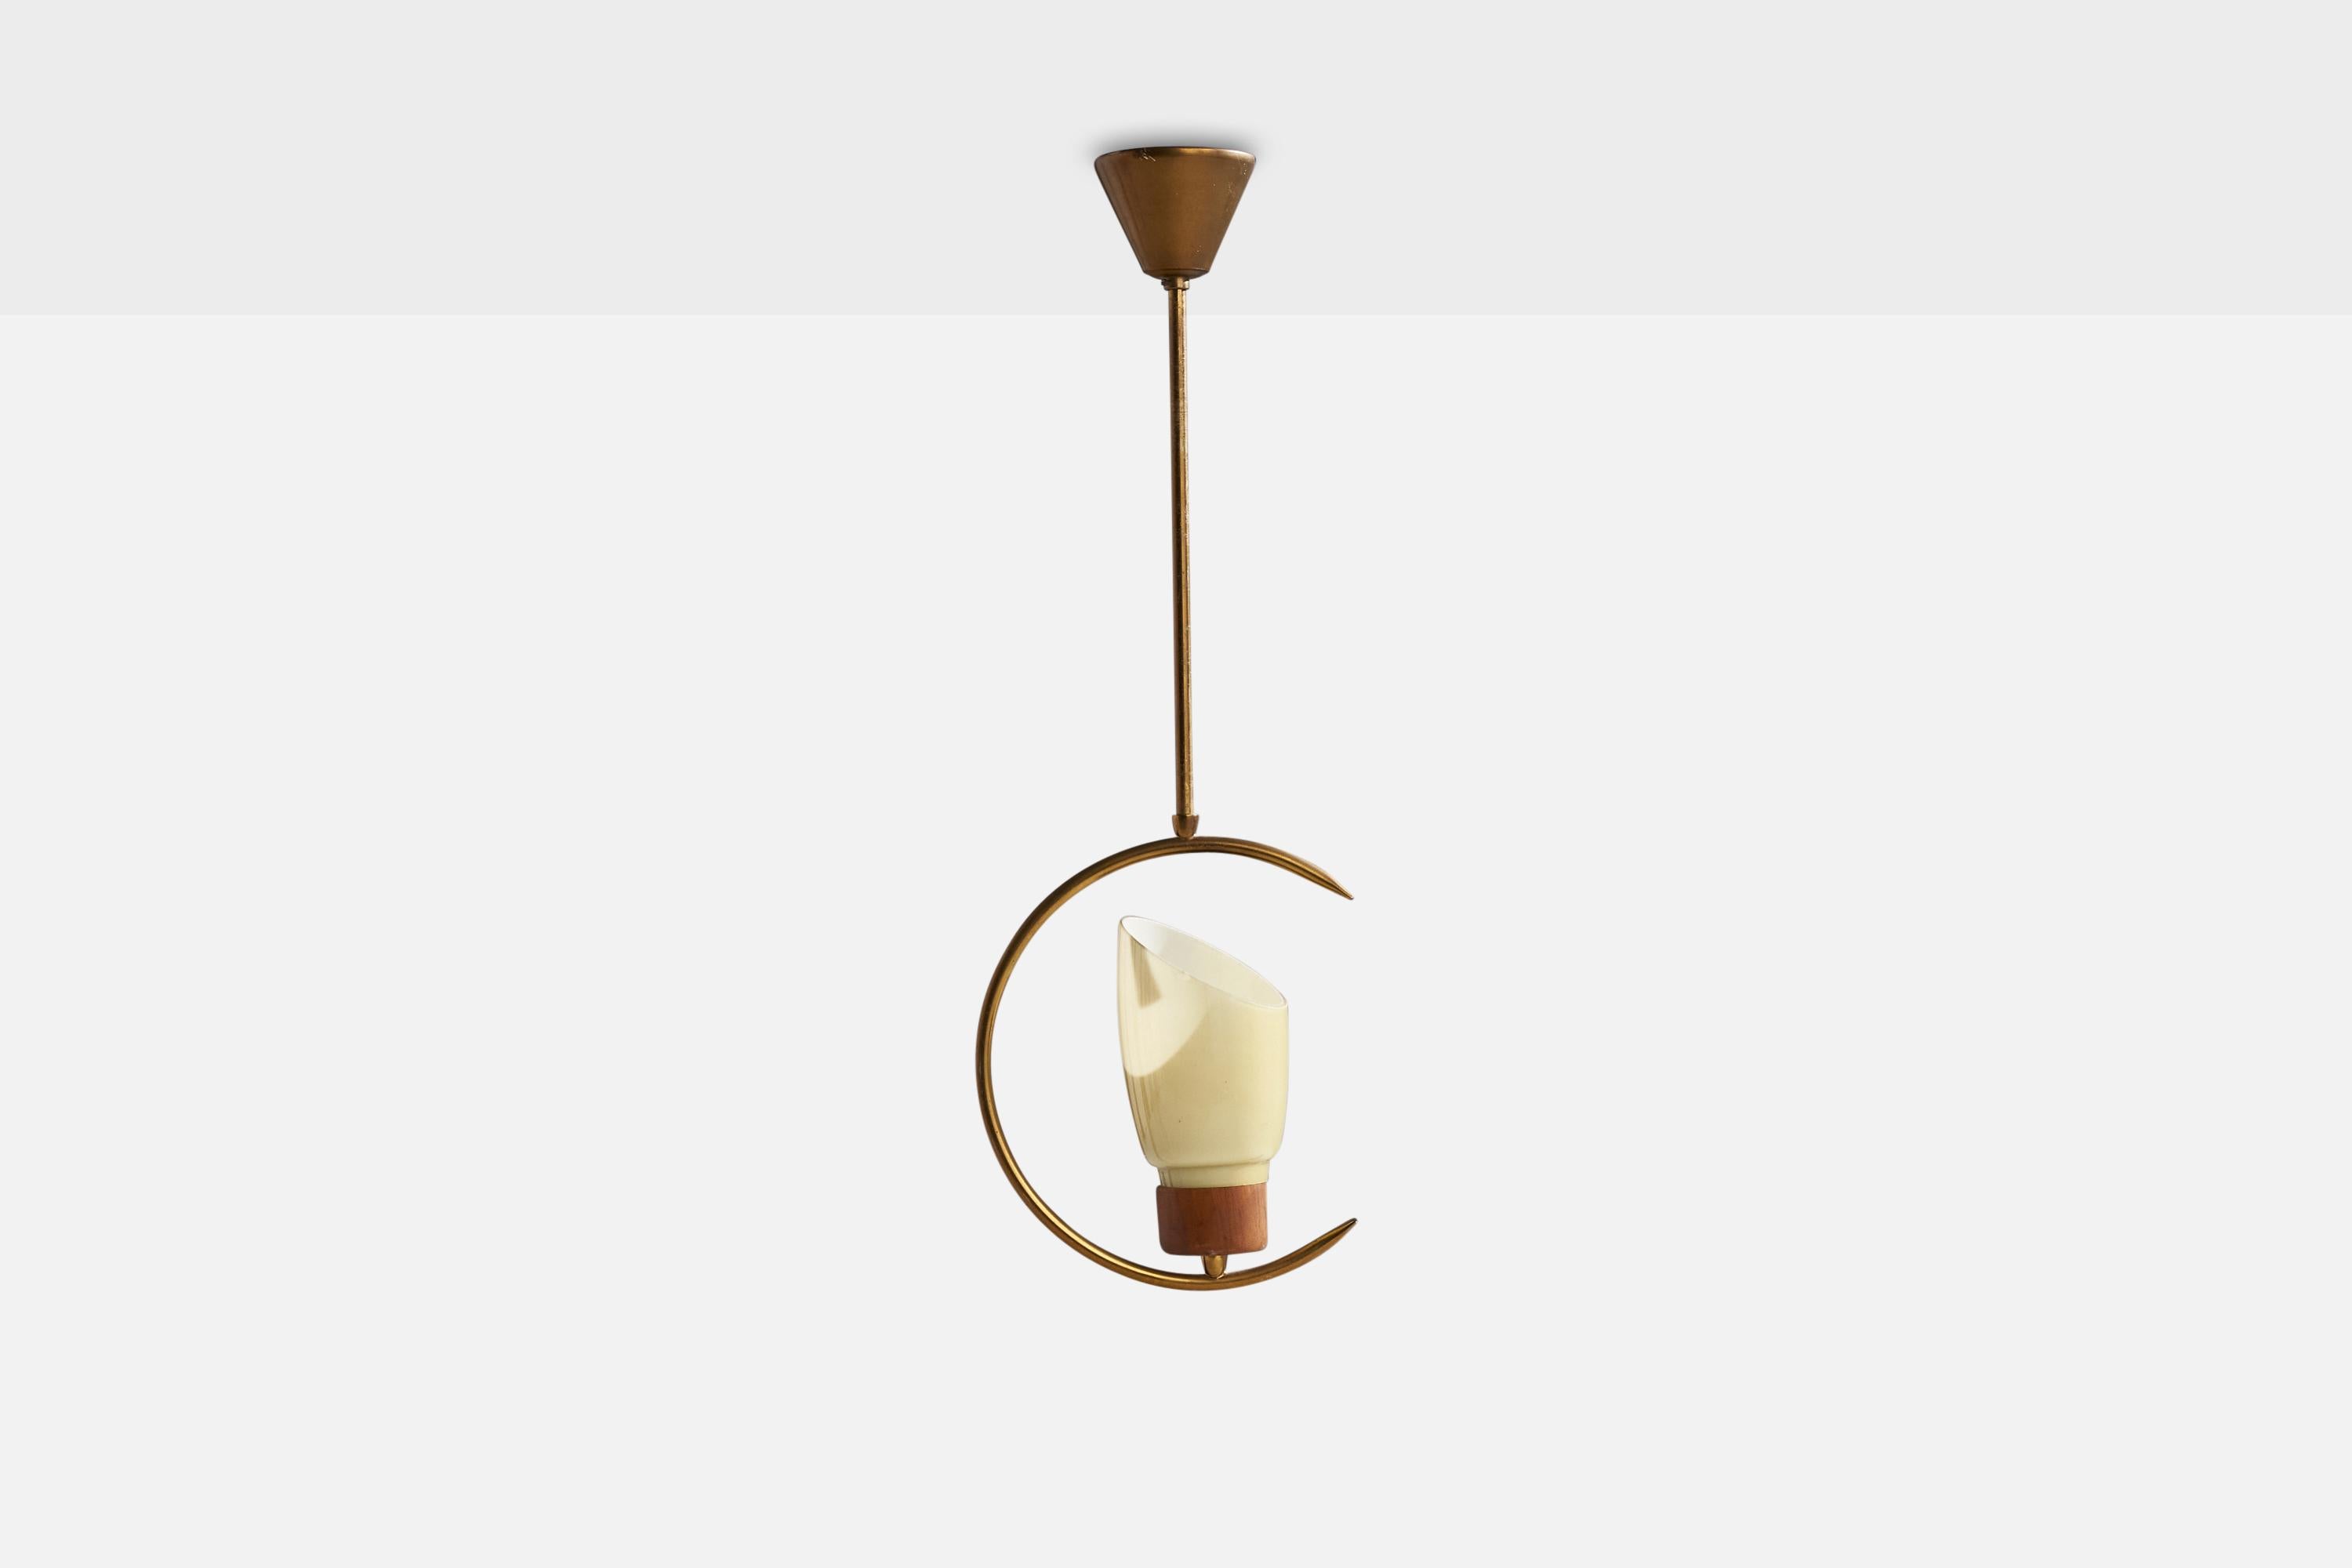 A brass, teak and off-white glass pendant designed and produced in Sweden, 1950s.

Dimensions of canopy (inches): 2.75” H x 3.25” Diameter

Socket takes standard E-26 bulbs. 1 socket.There is no maximum wattage stated on the fixture. All lighting